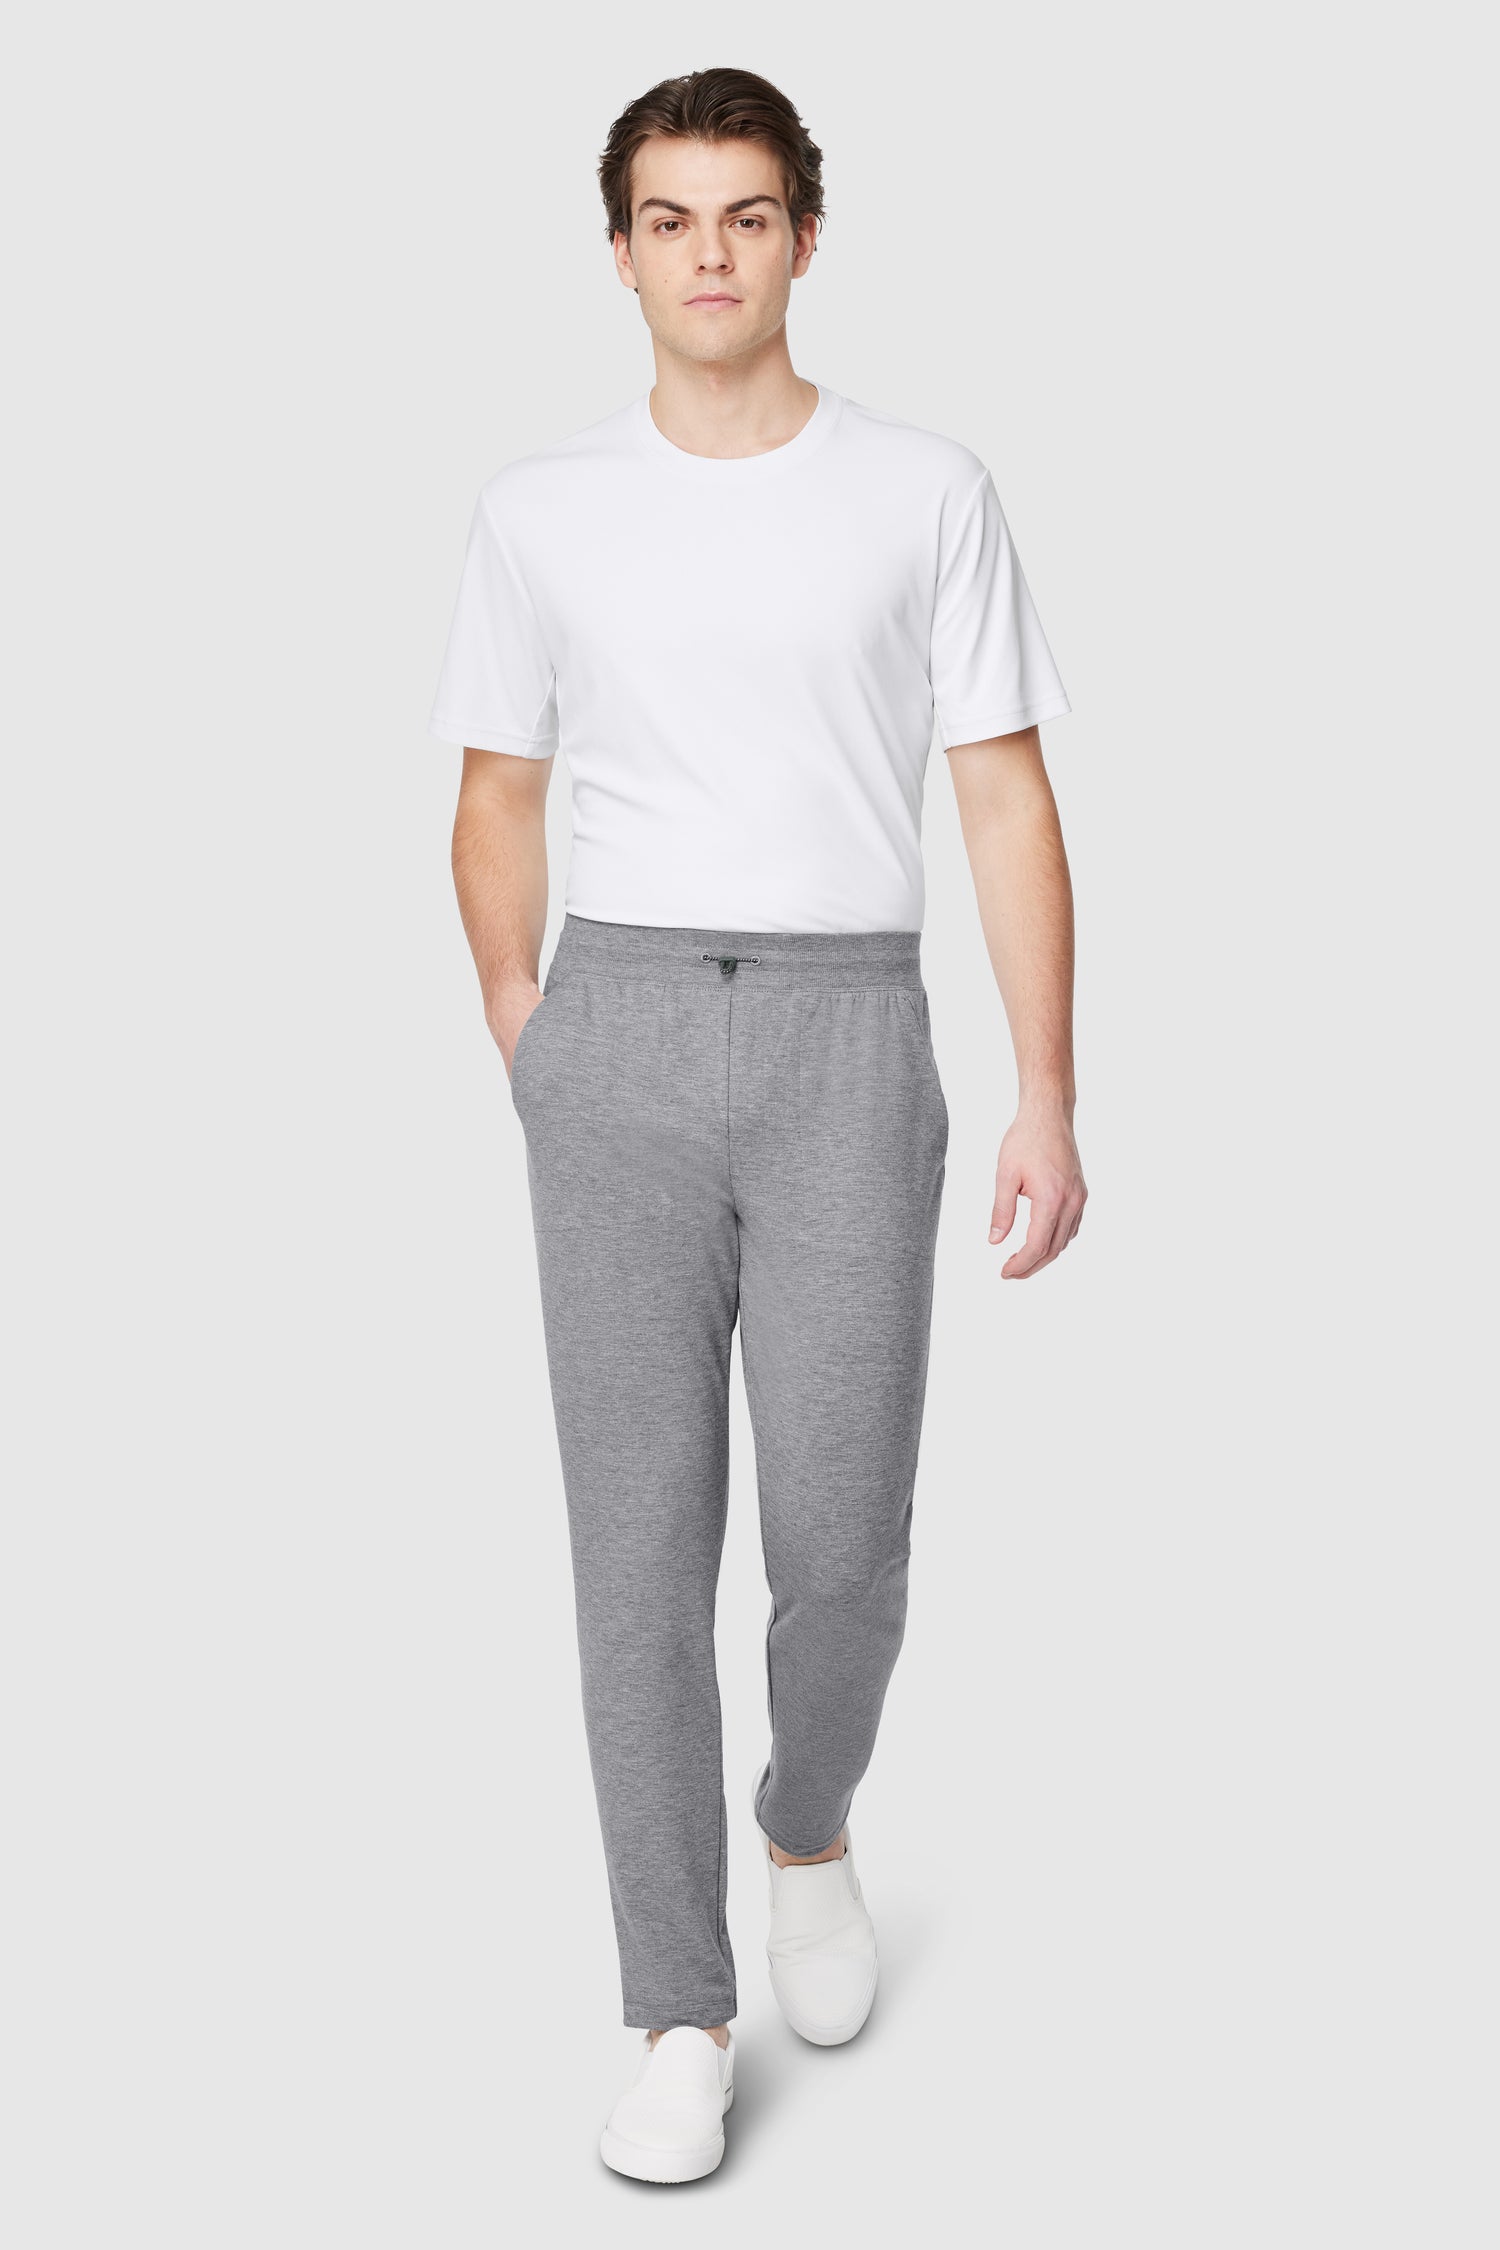 Free FWD Men's Terry Jogger - BEST SELLING